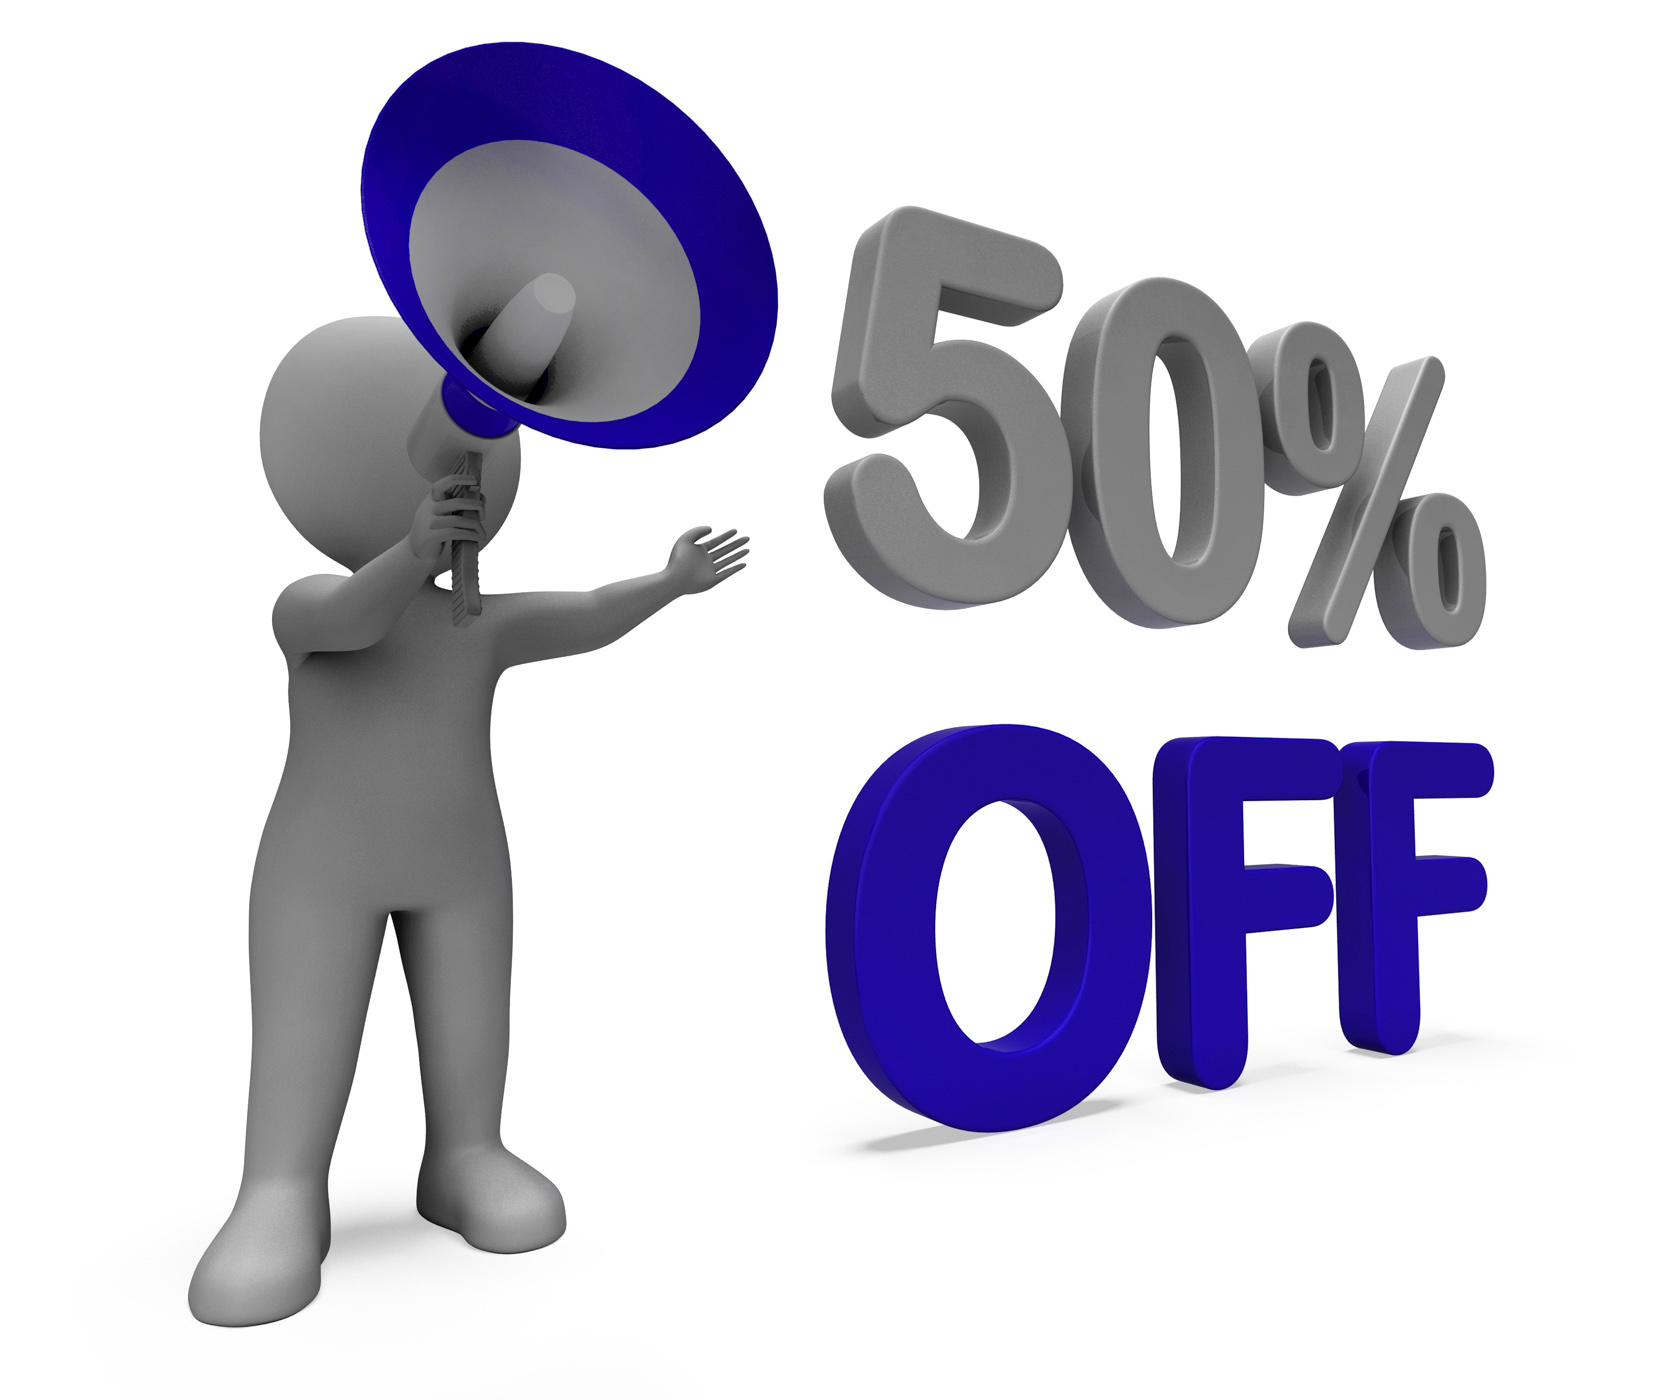 Fifty percent off character means discount price or sale 50 photo